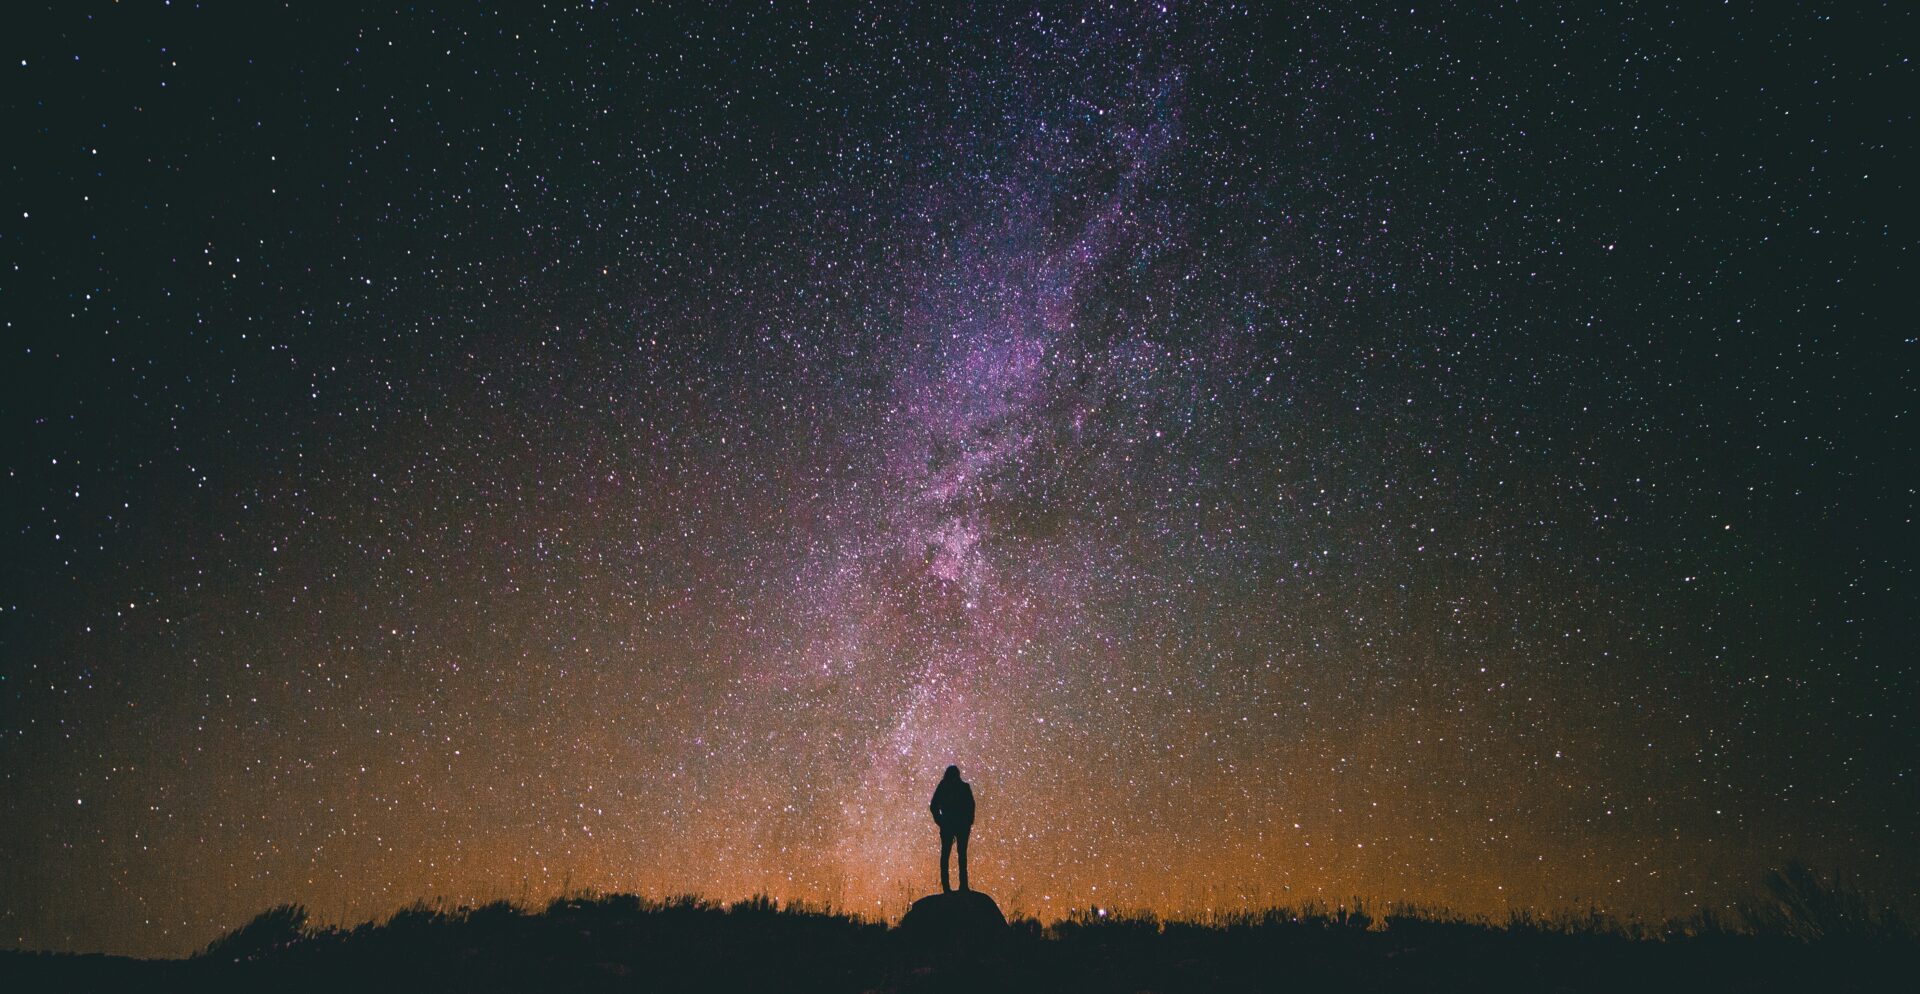 Silhouette of man standing up looking at night's sky